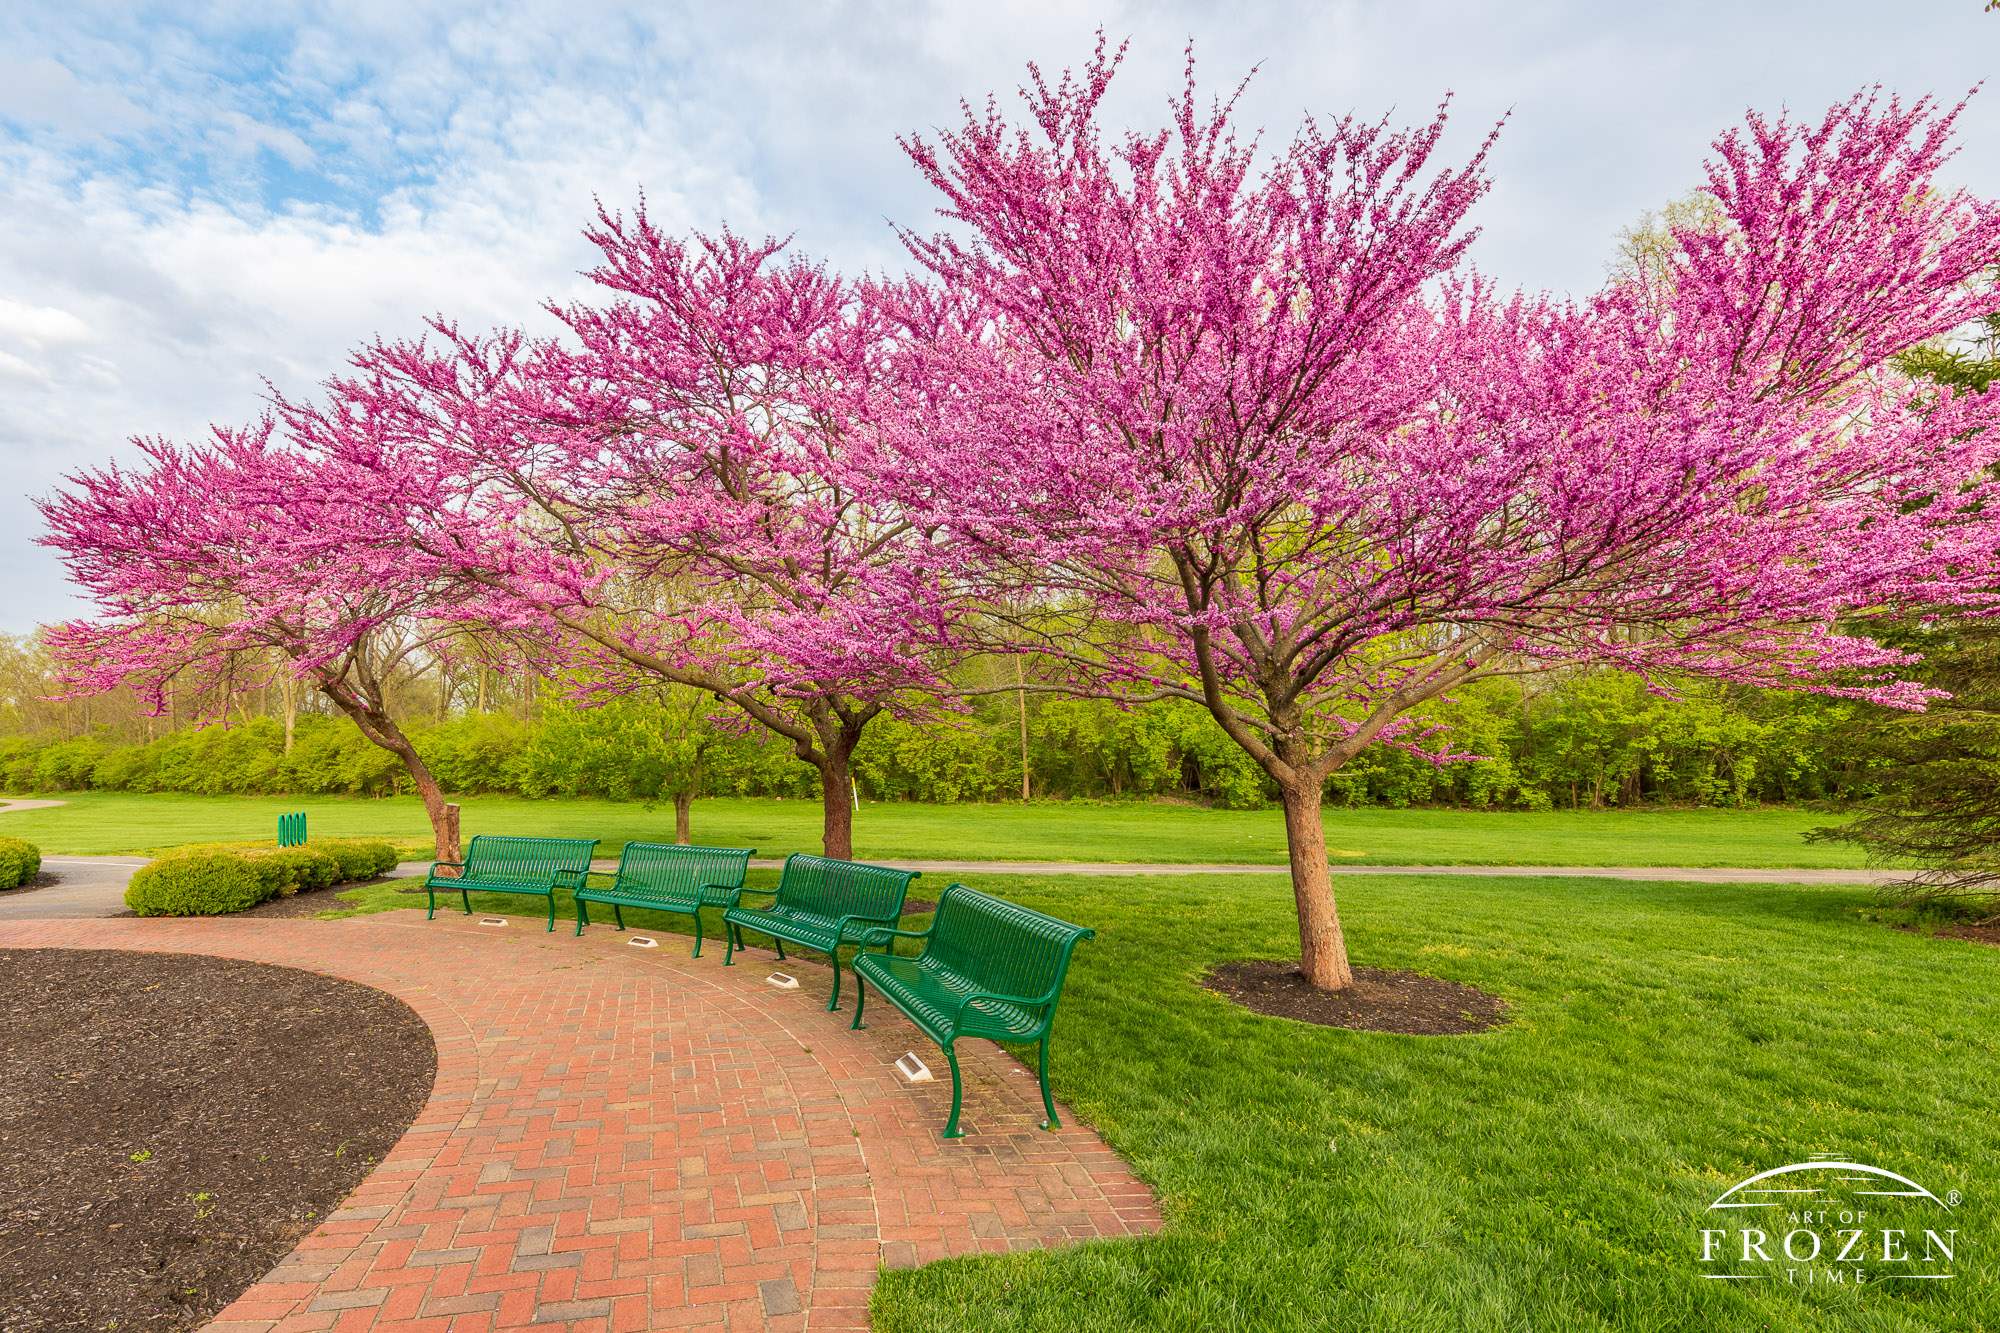 A grouping of three Eastern Red Bud tress showing their flowering pink blooms